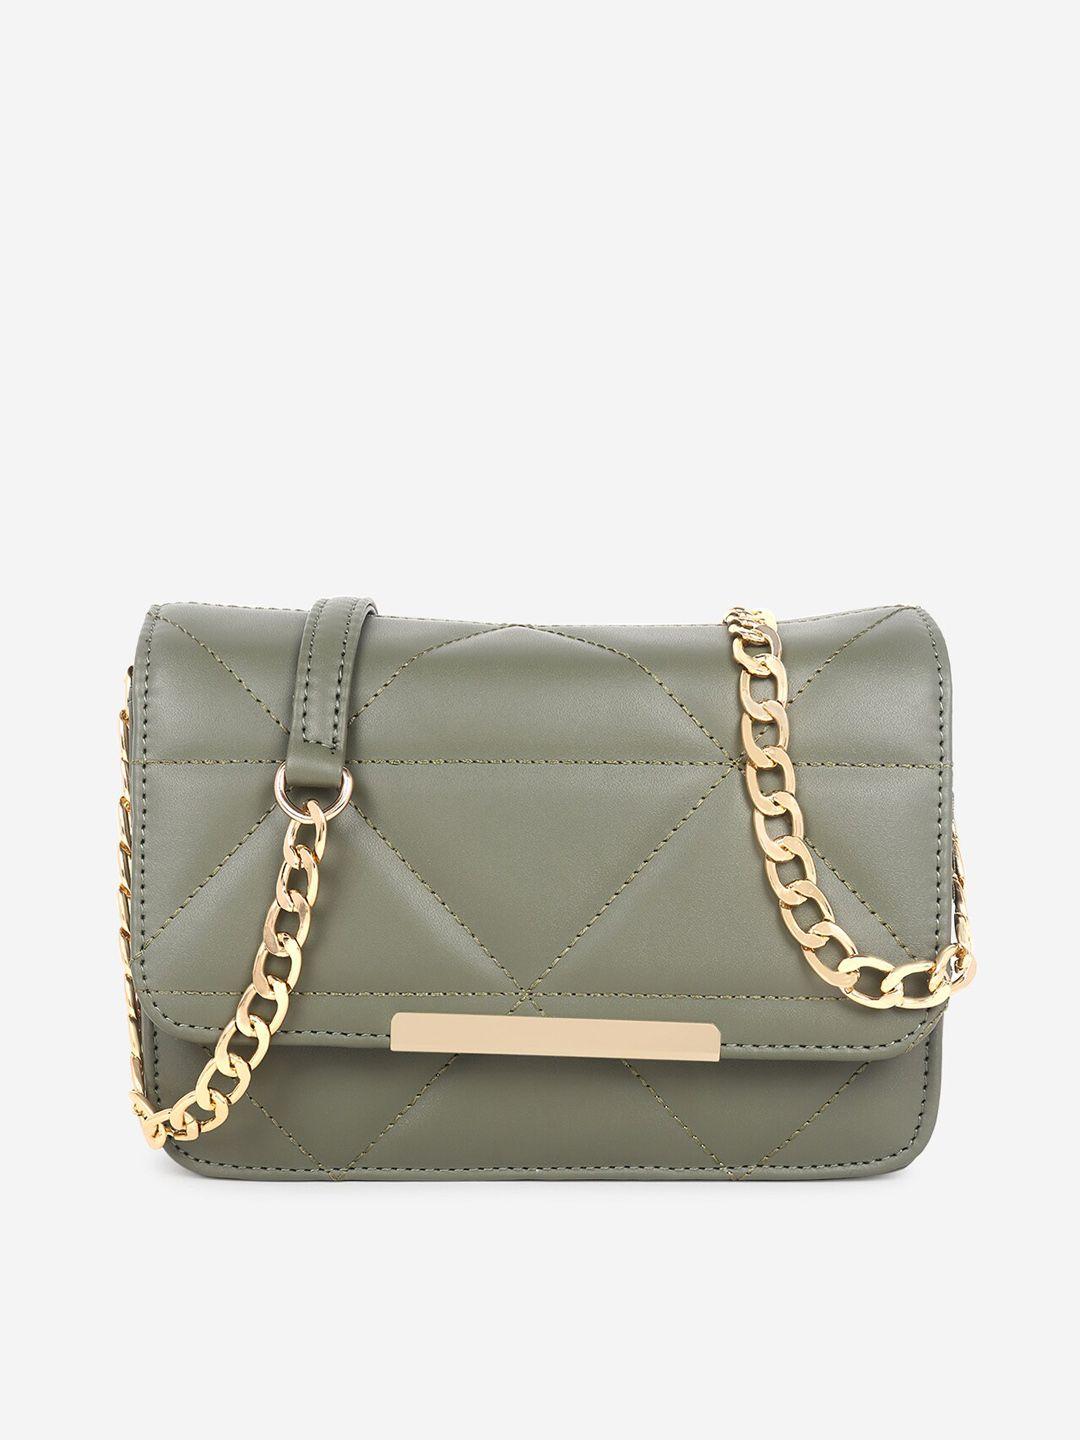 black spade olive green textured structured sling bag with quilted